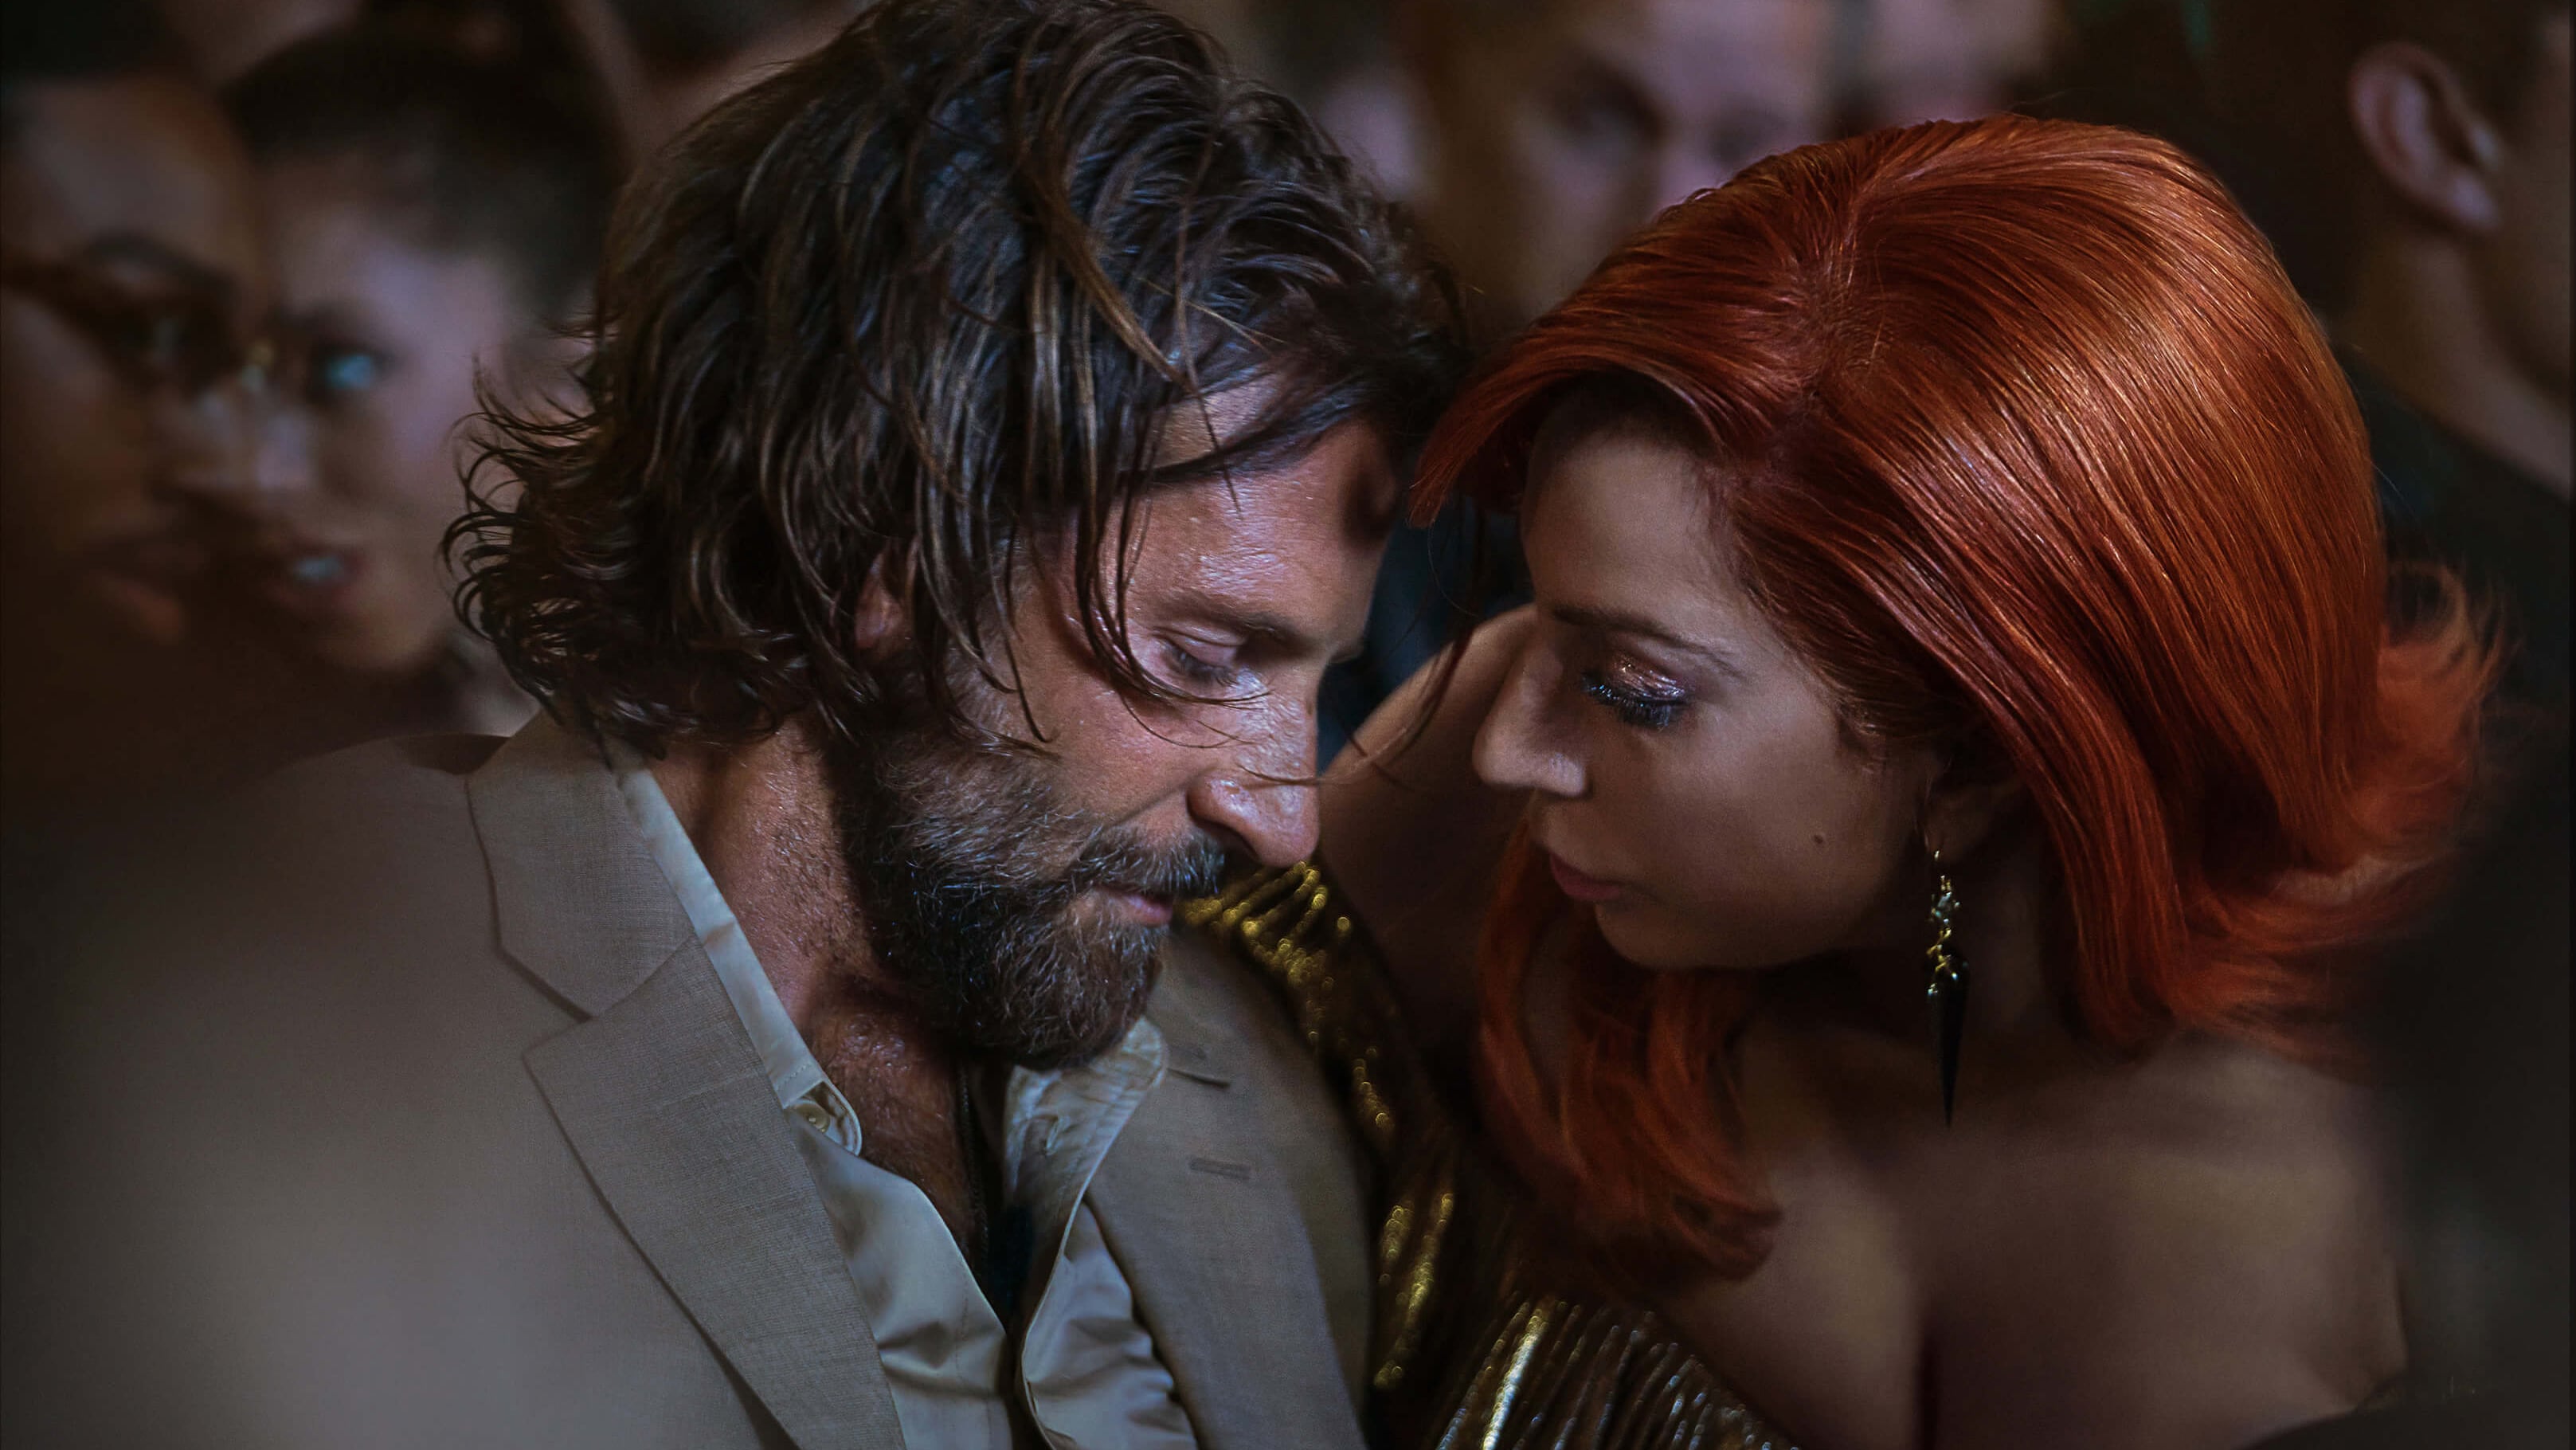 Image from the movie "A Star Is Born"